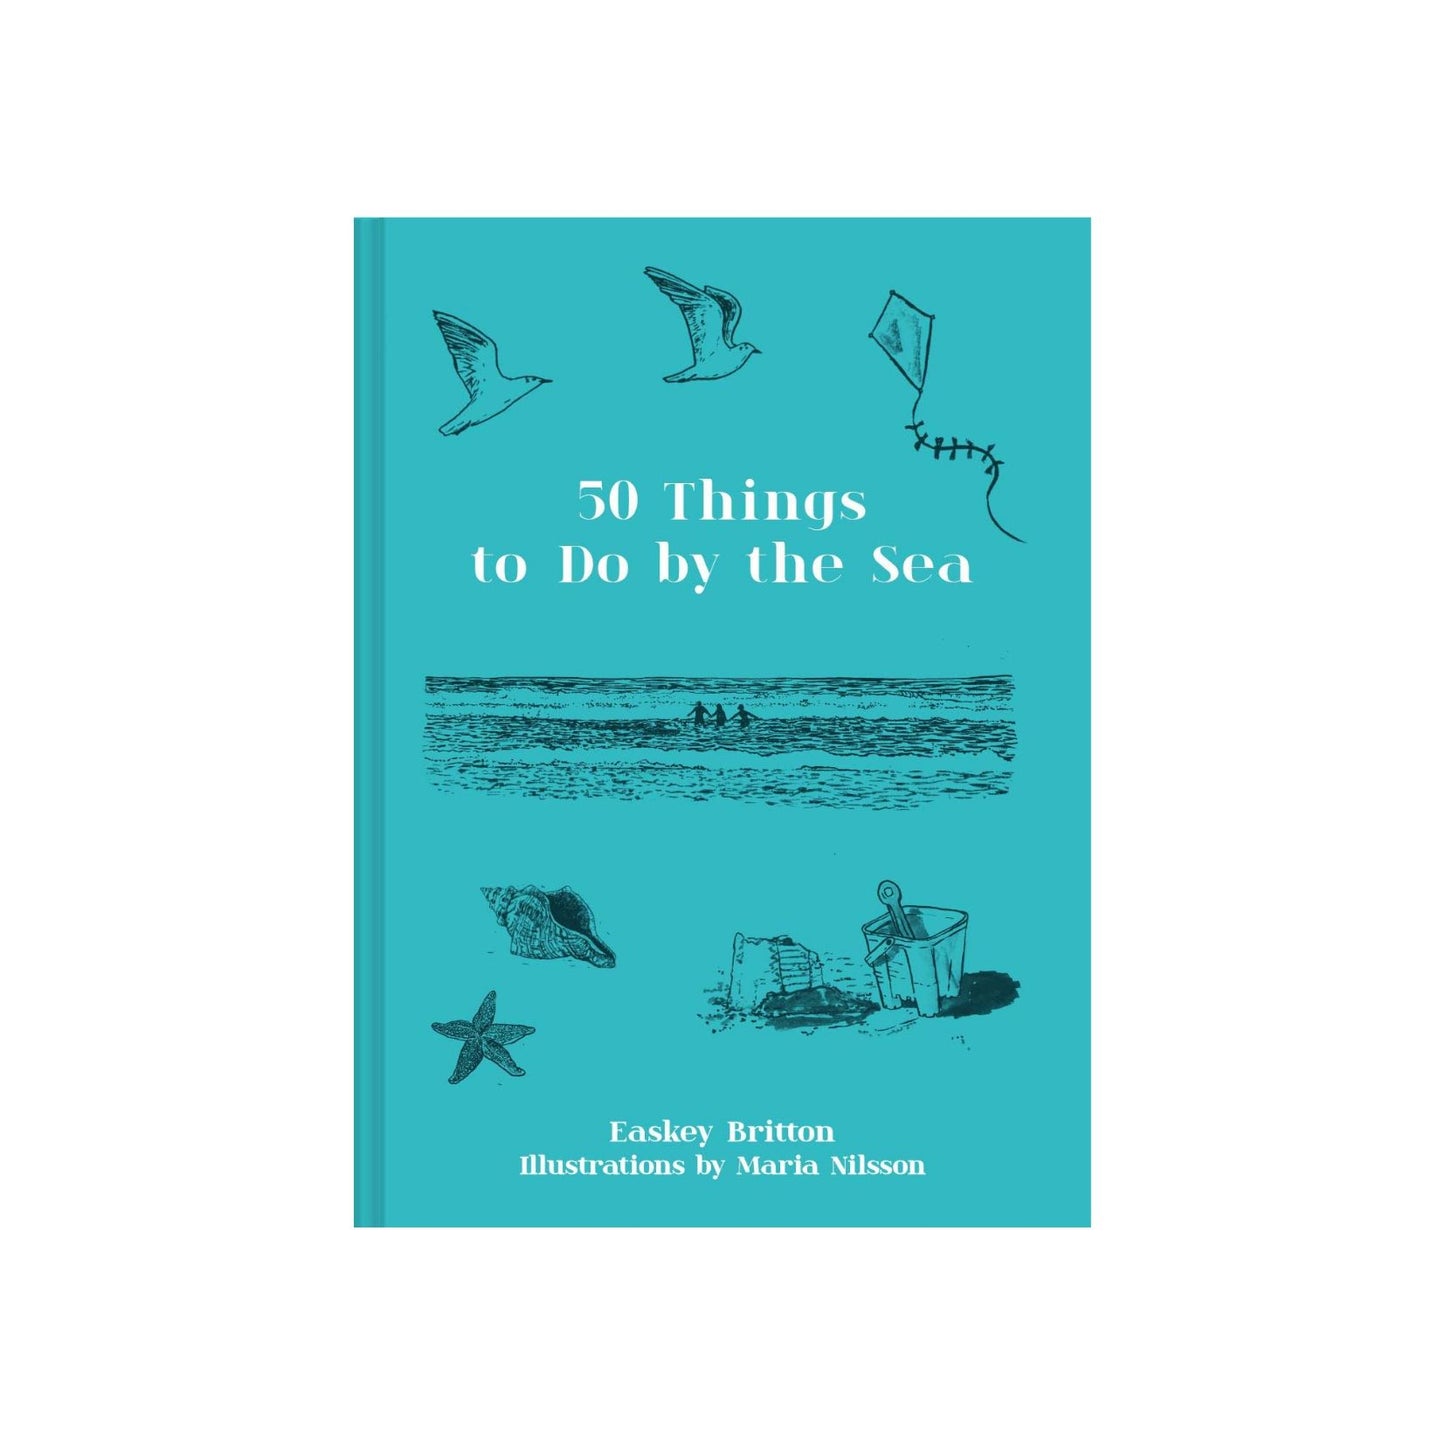 50 Things To Do By The Sea by Easkey Britton and Maria Nilsson